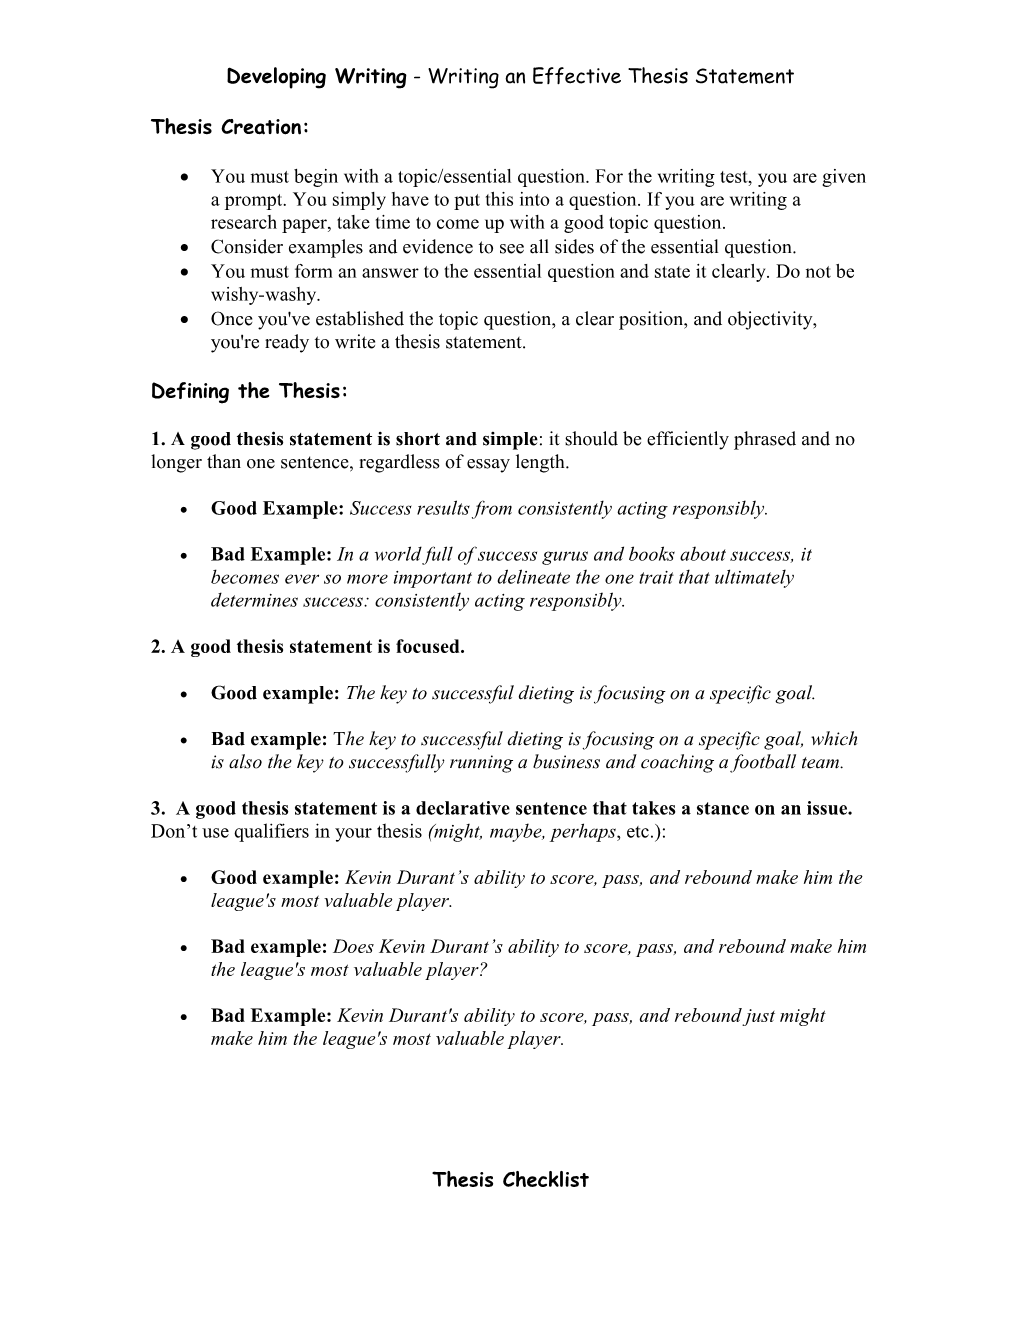 Developing Writing - Writing an Effective Thesis Statement